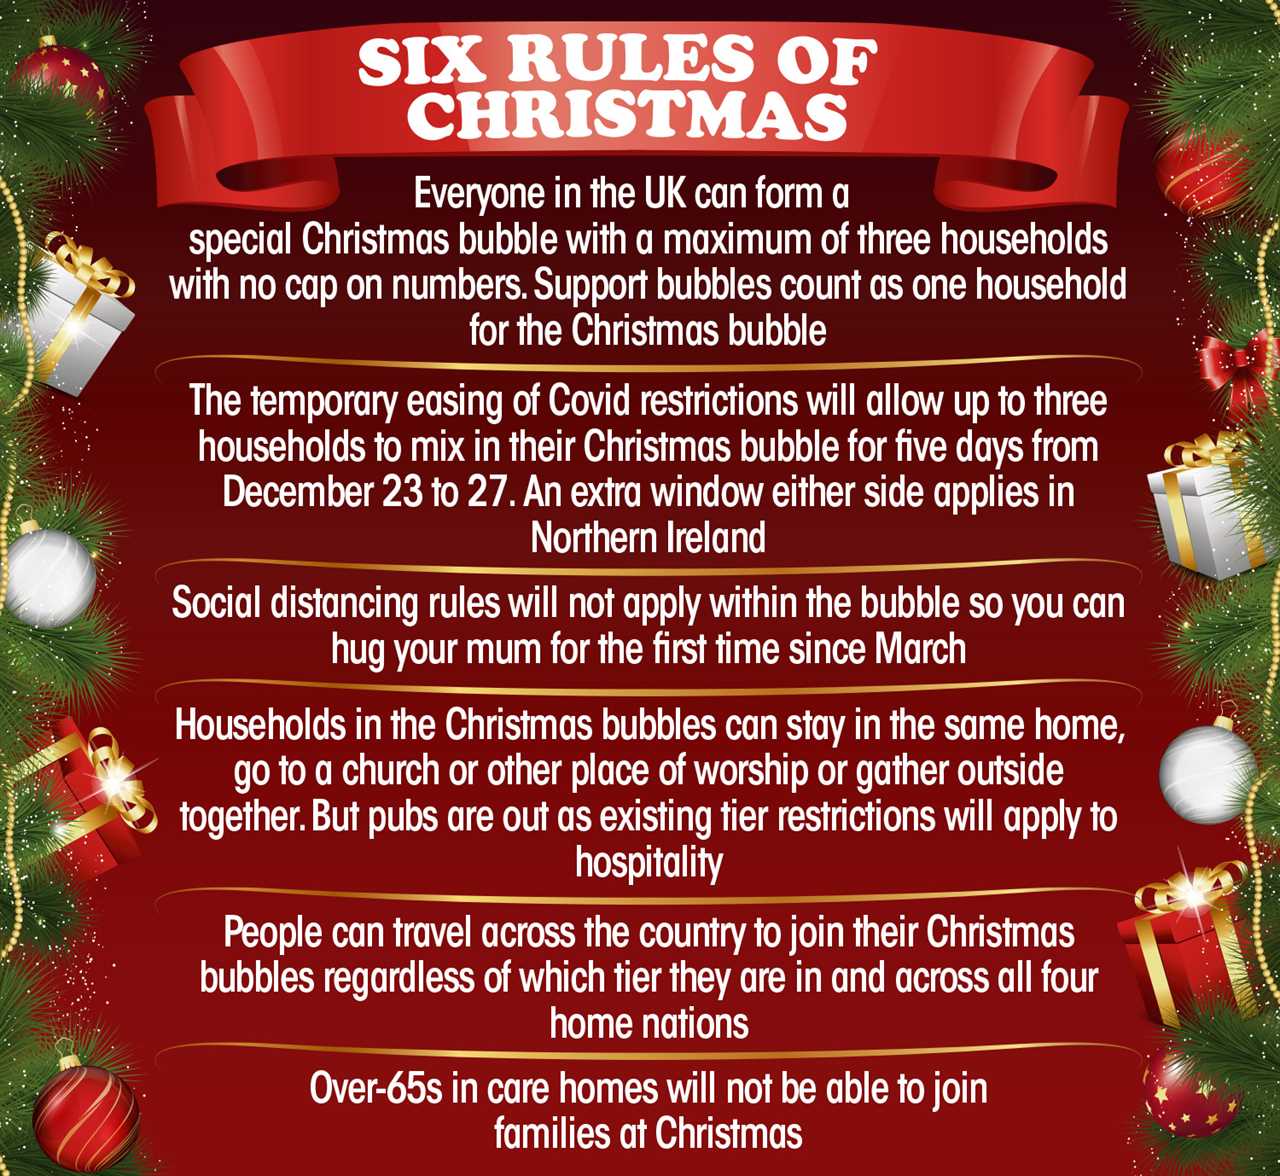 All the Christmas Tier rules you should follow to keep your family safe this holiday reason